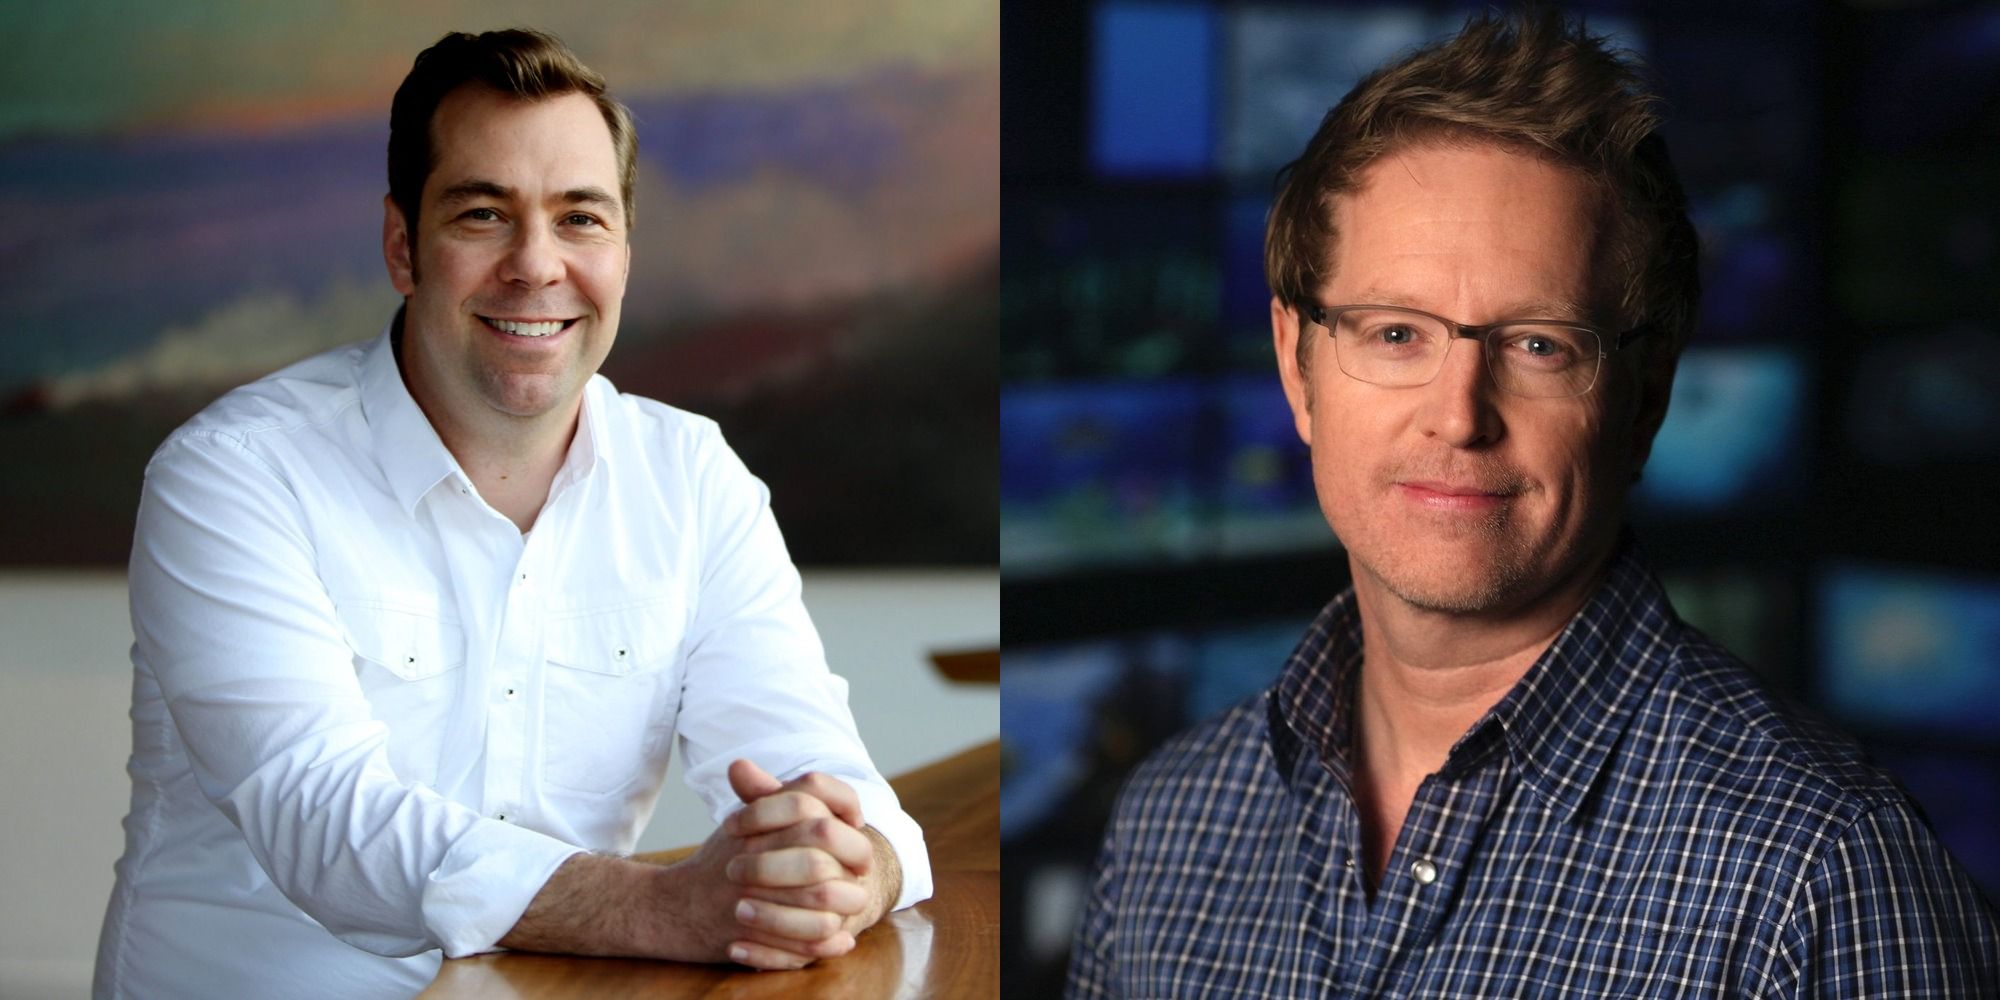 Split image showing directors Brian Fee and Andrew Stanton